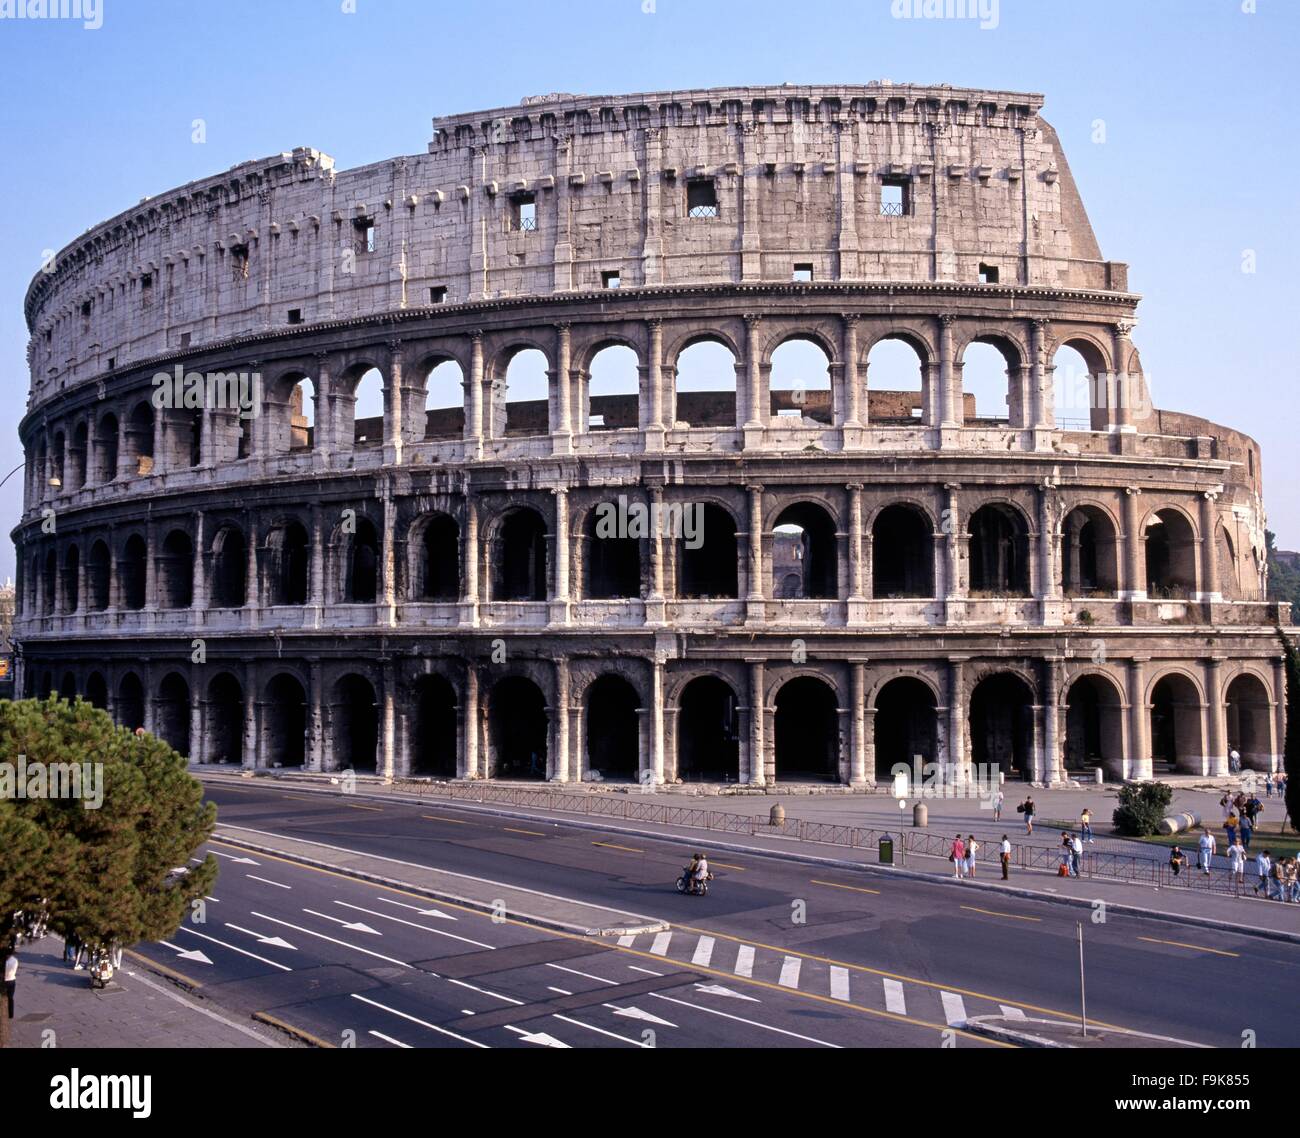 View of the outside of the Roman Colosseum (originally the Flavian Amphitheatre), Rome, Italy, Europe. Stock Photo